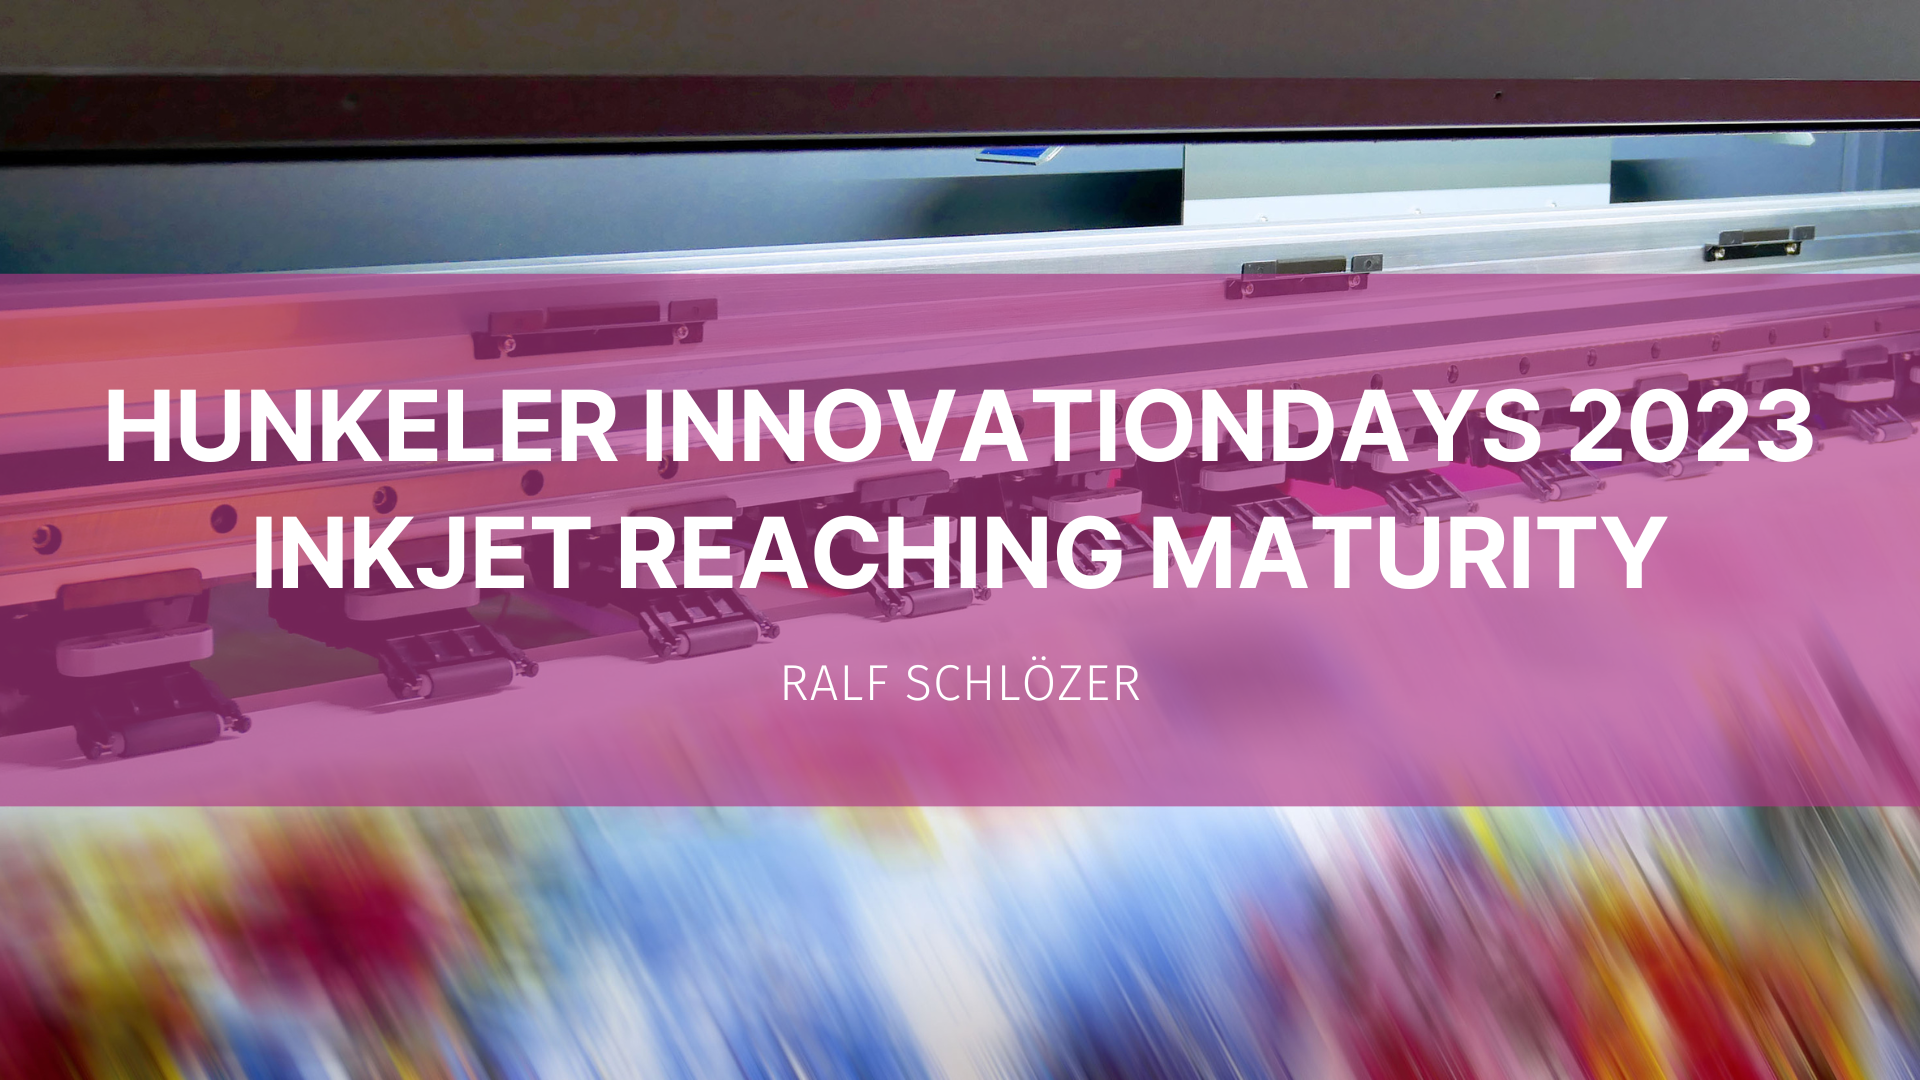 Featured image for “Hunkeler innovationdays 2023 – inkjet reaching maturity”